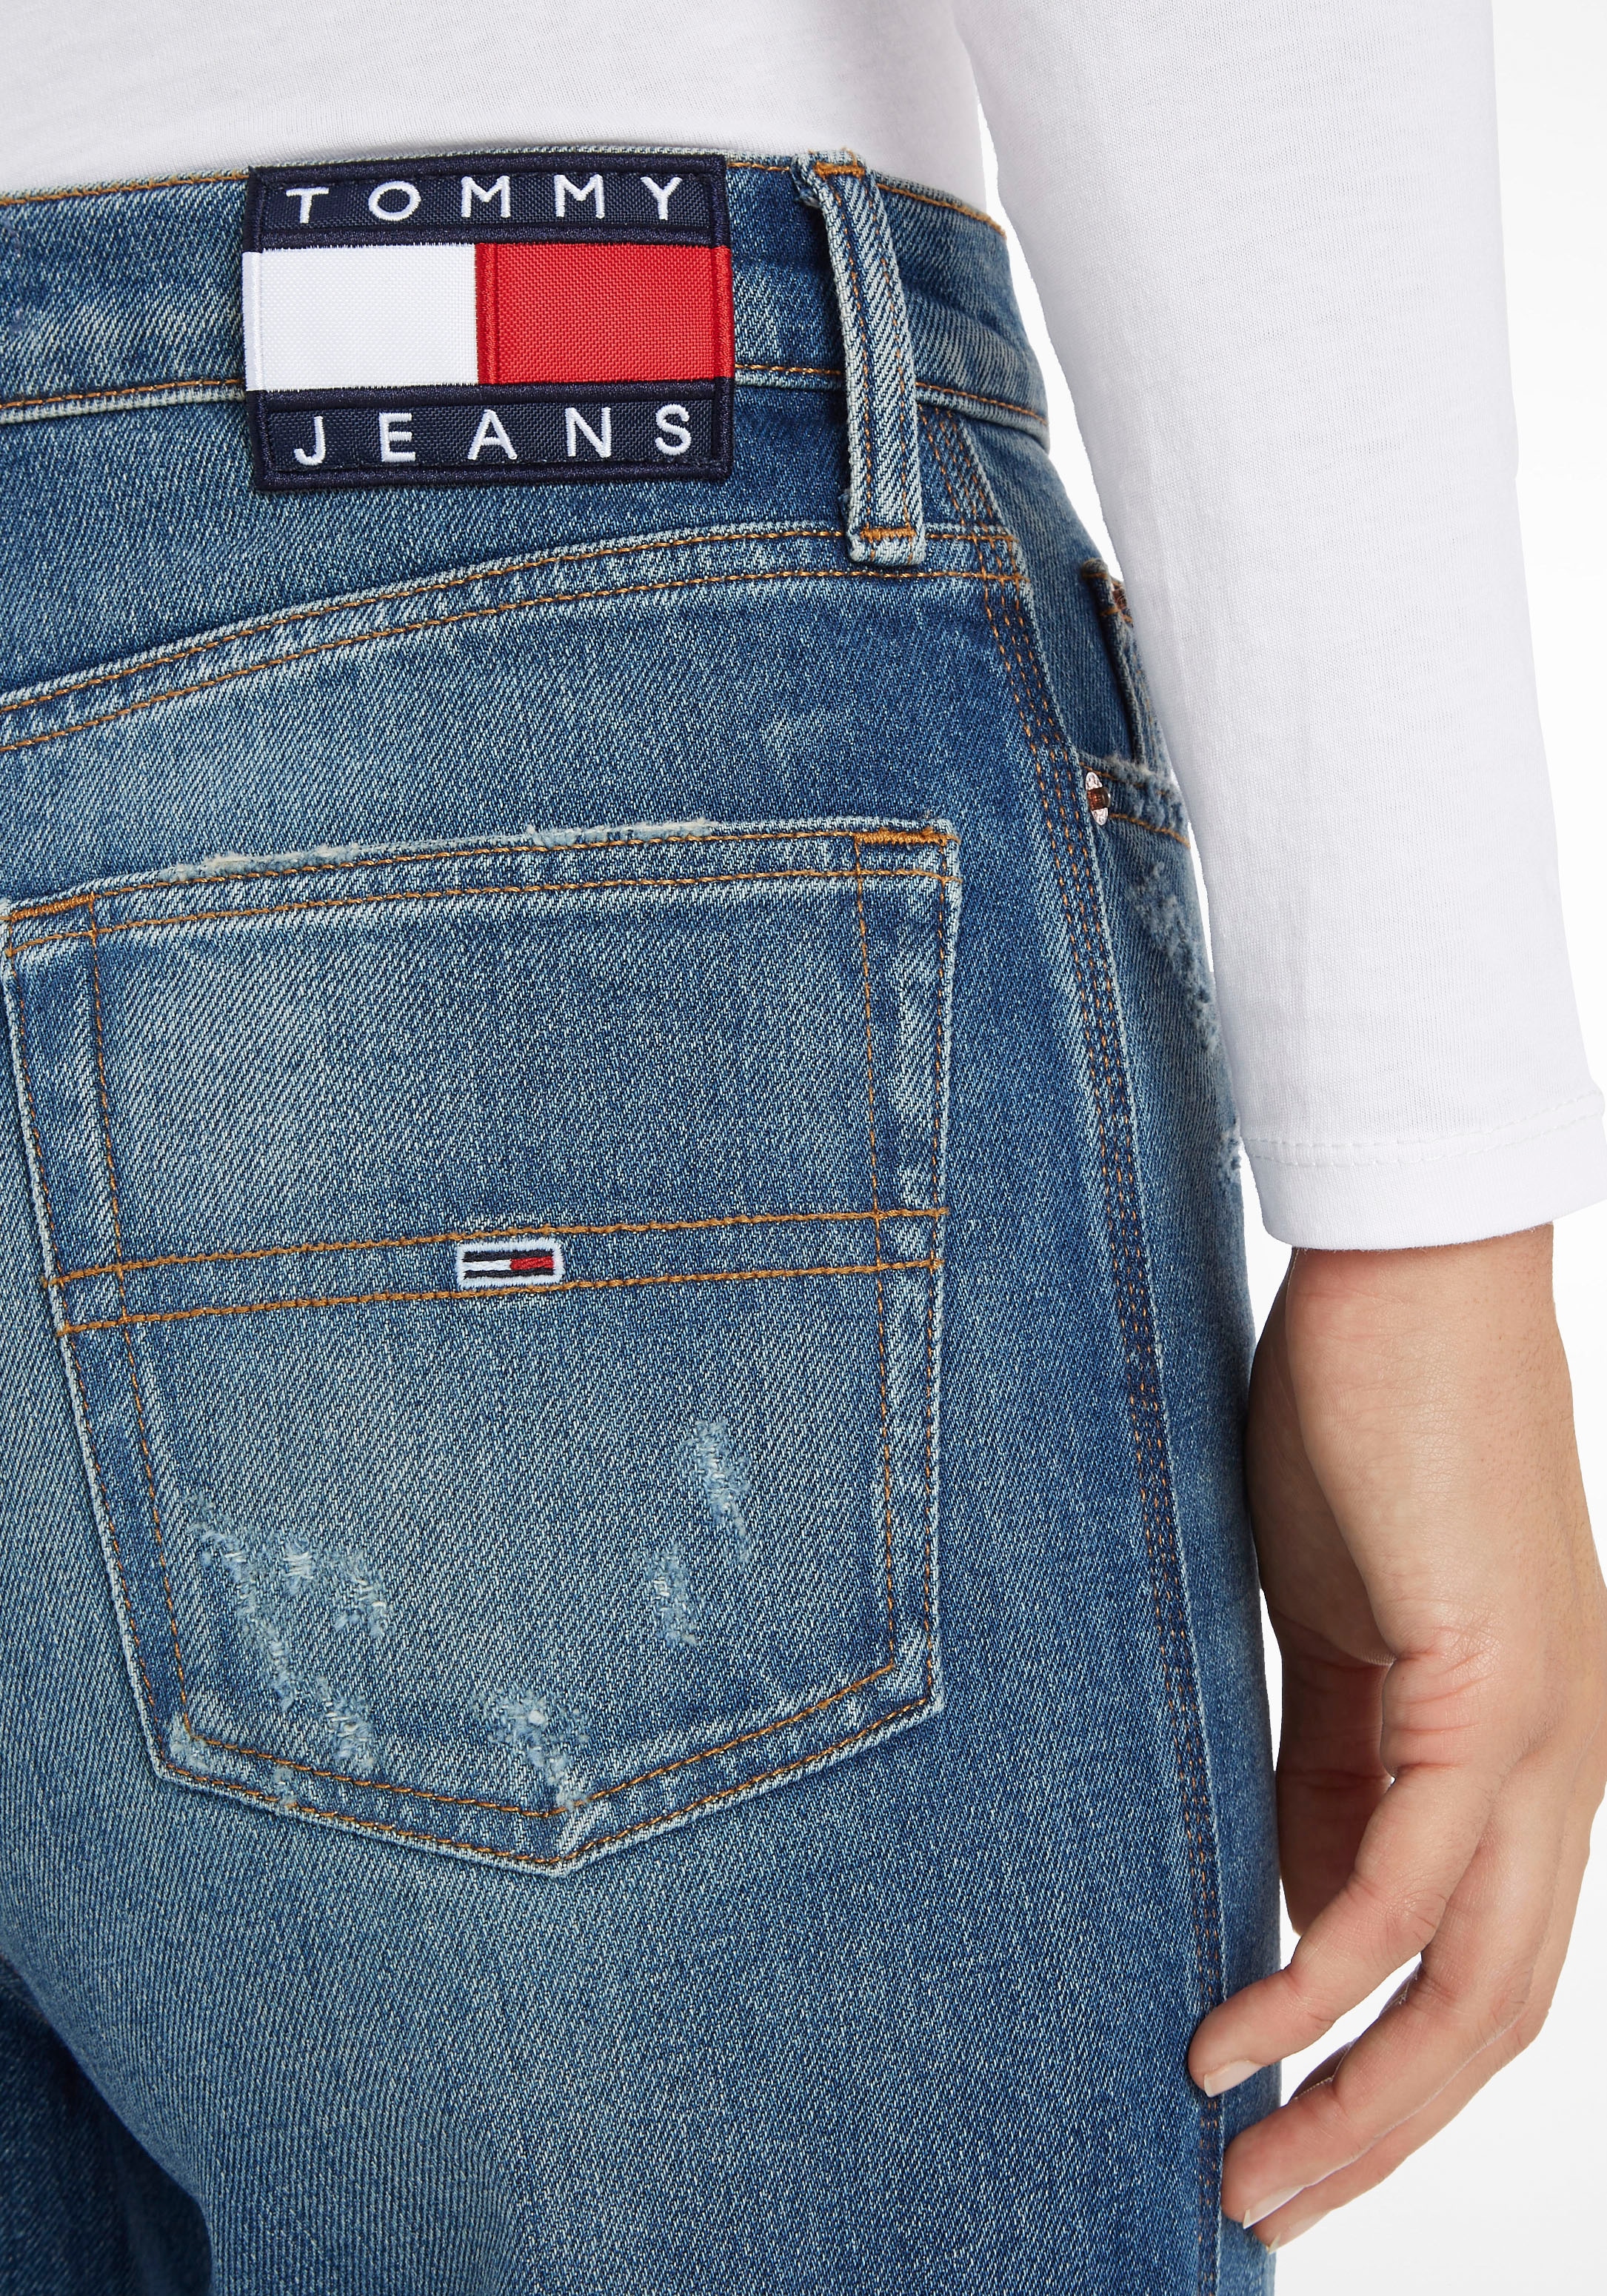 Jeans, Weite Jeans Logobadges mit bei Tommy ♕ Tommy Jeans